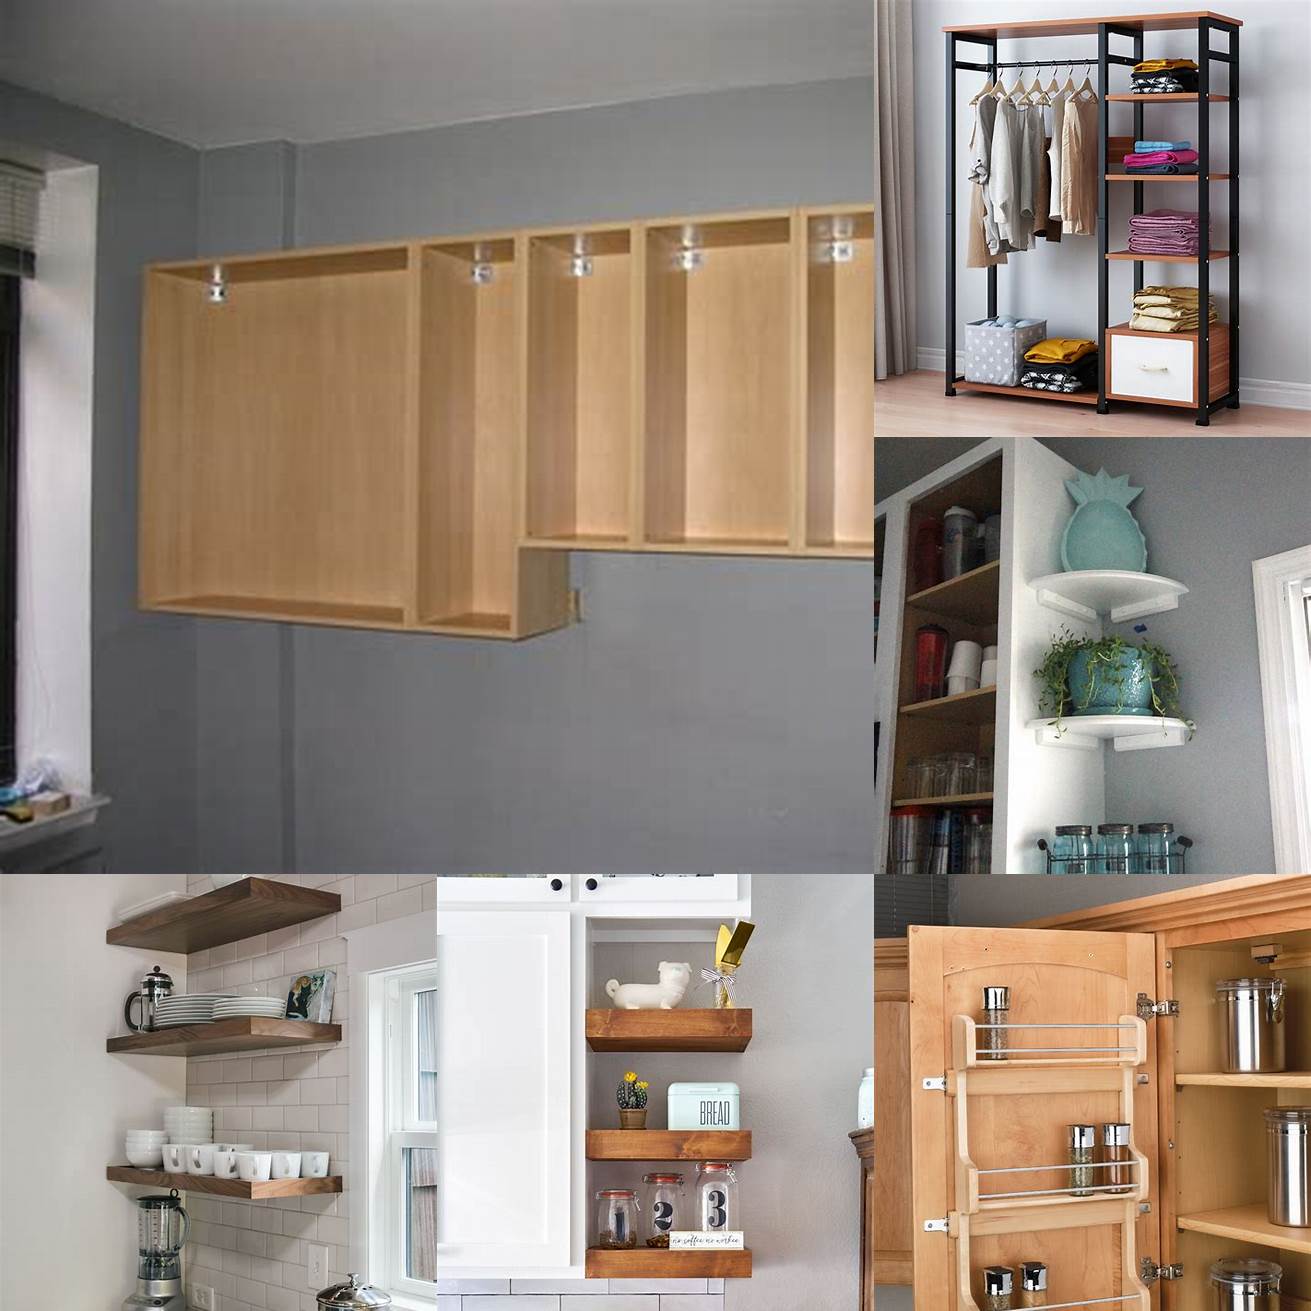 Easy to maintain Unlike open shelves or hanging racks storage cabinets require minimal maintenance and can be easily cleaned and dusted